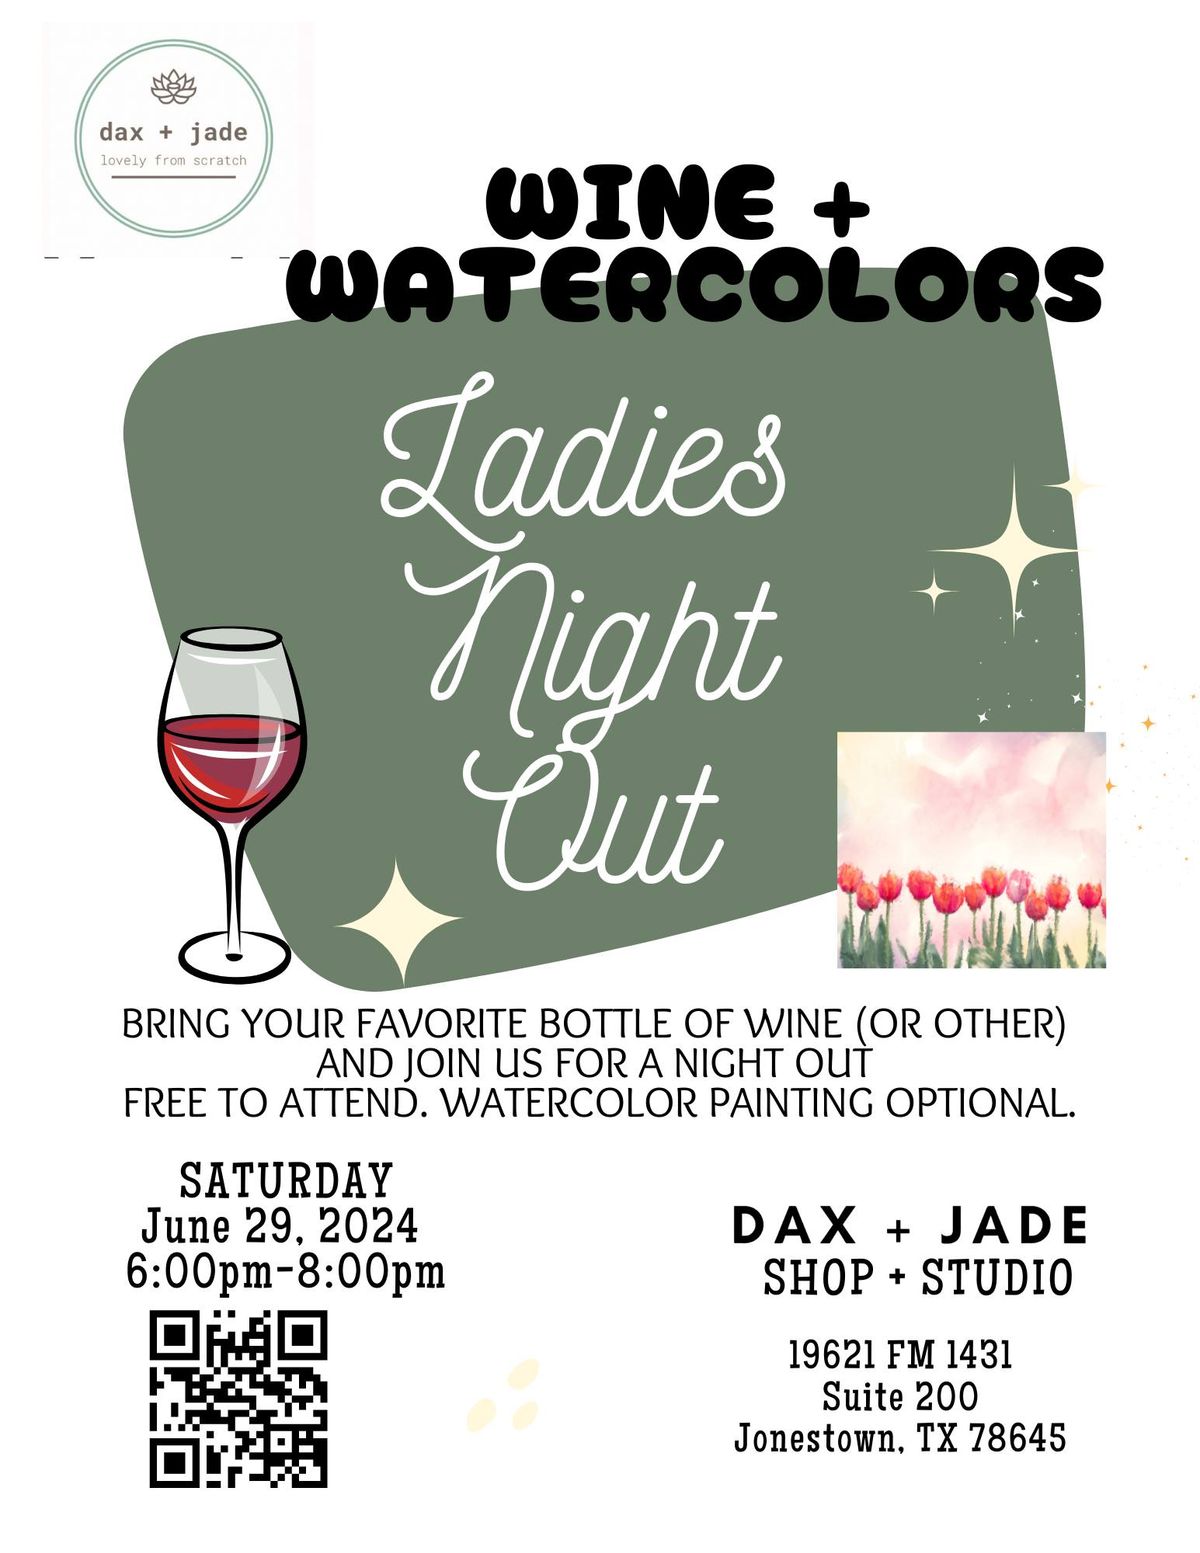 Ladies Night Out- Wine + Watercolors